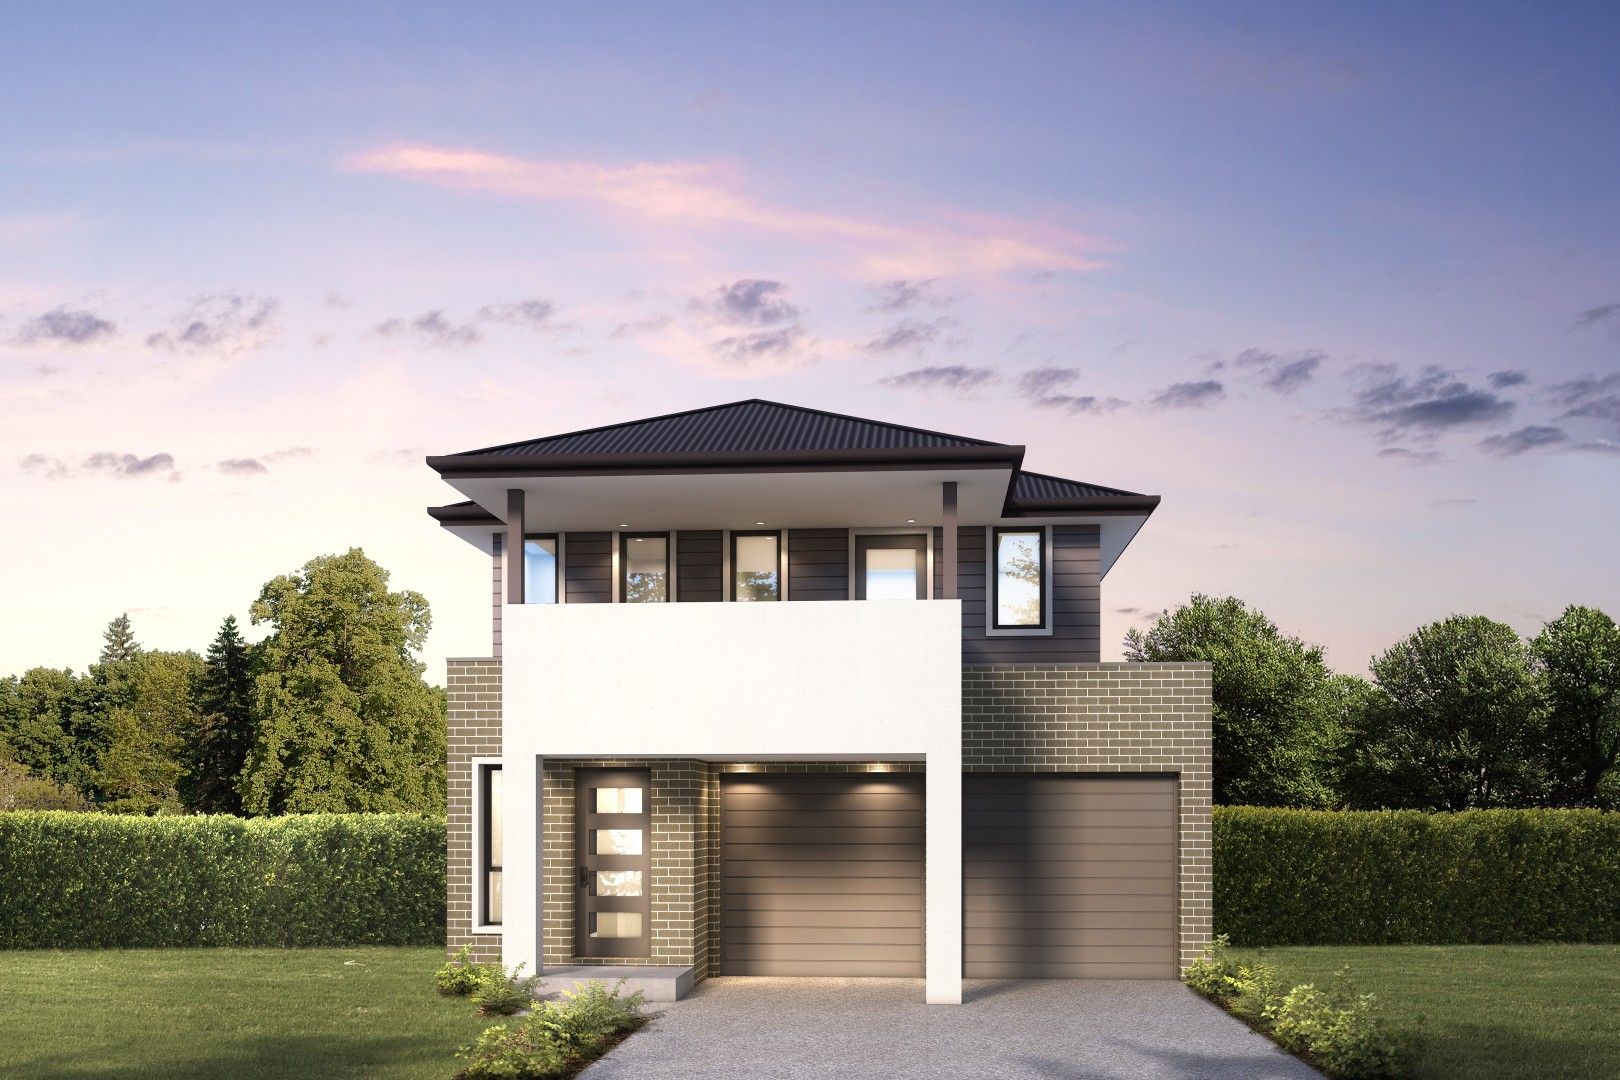 4 bedrooms New House & Land in Lot 89 Constellation Avenue BOX HILL NSW, 2765